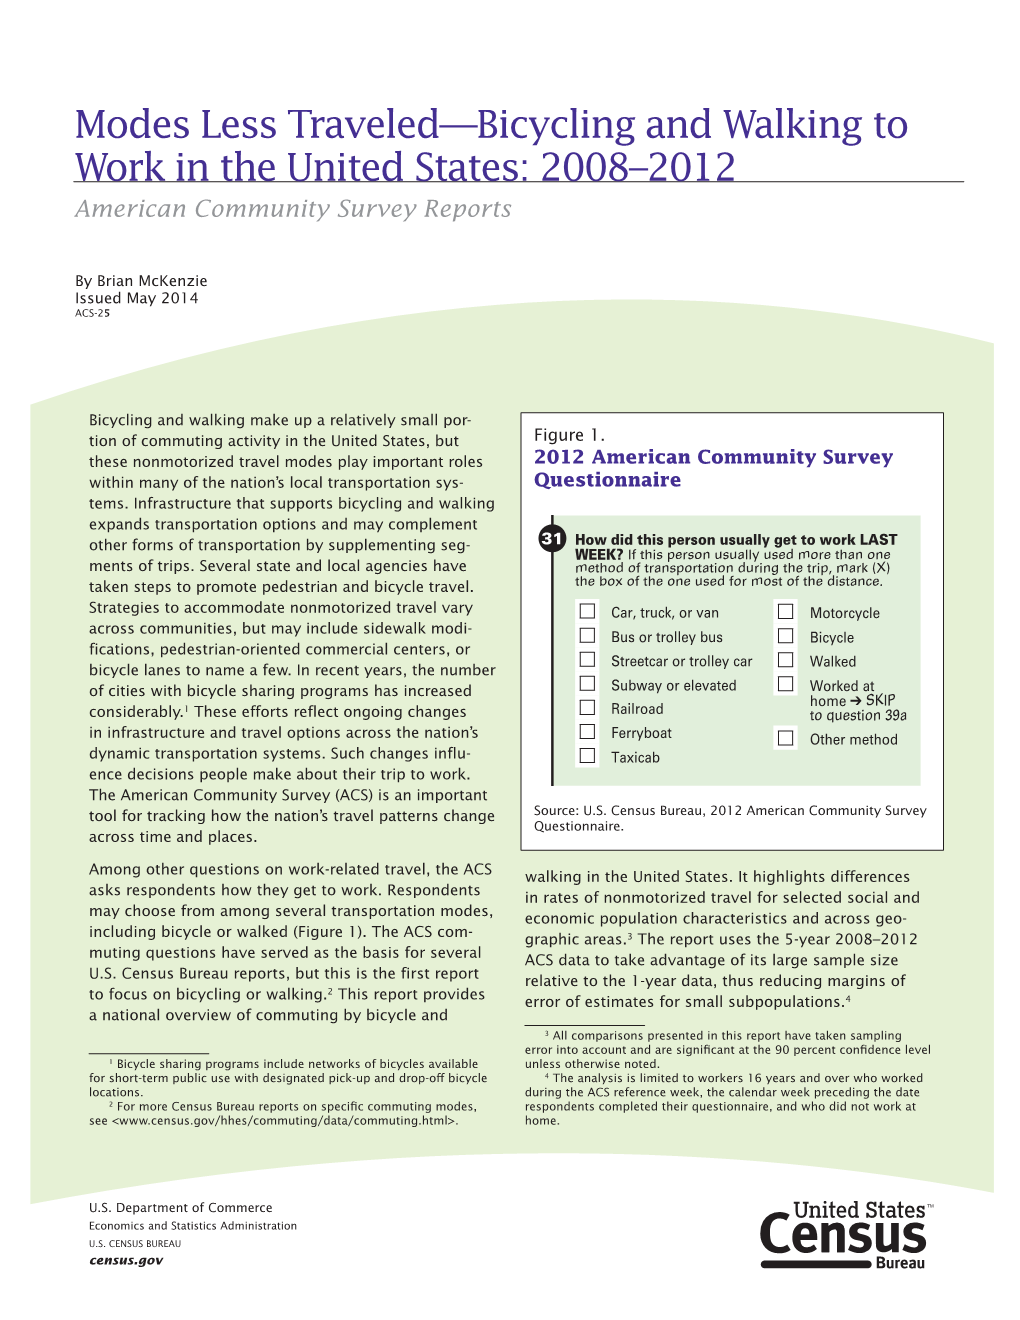 Modes Less Traveled—Bicycling and Walking to Work in the United States: 2008–2012 American Community Survey Reports